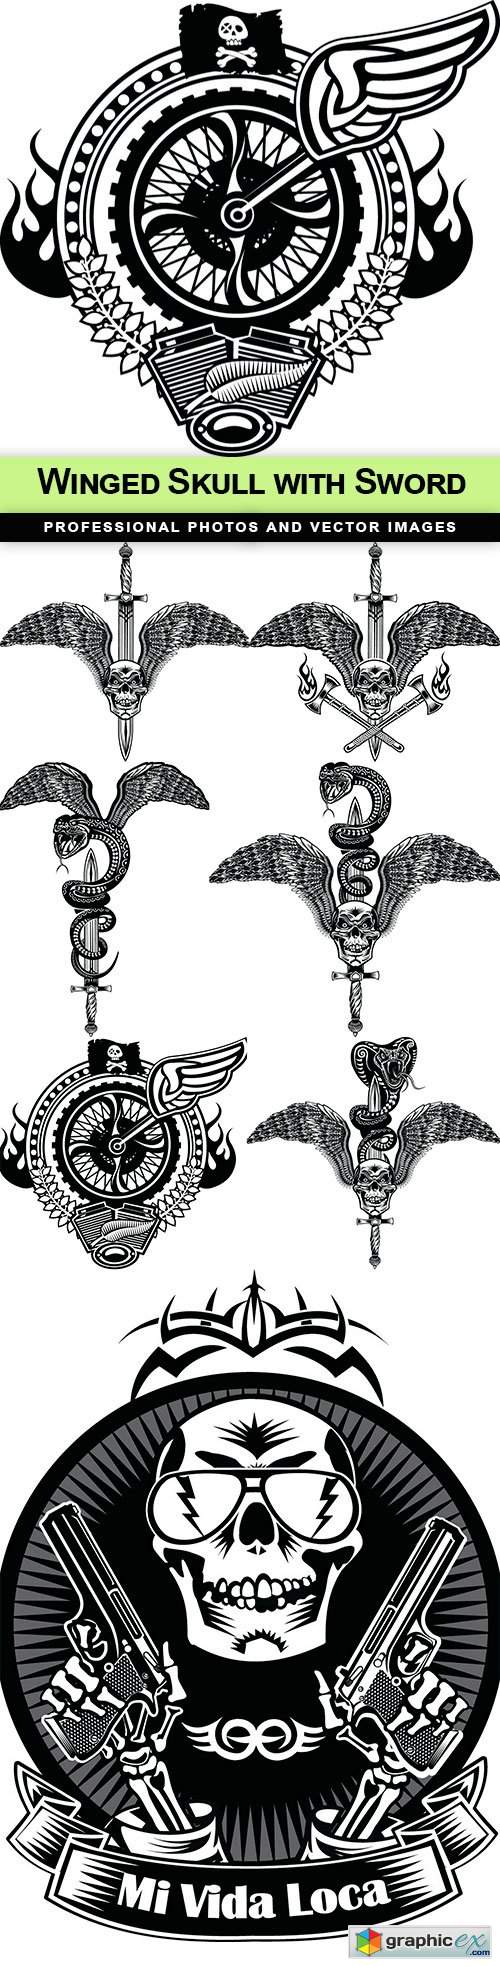  Winged Skull with Sword - 7 EPS 